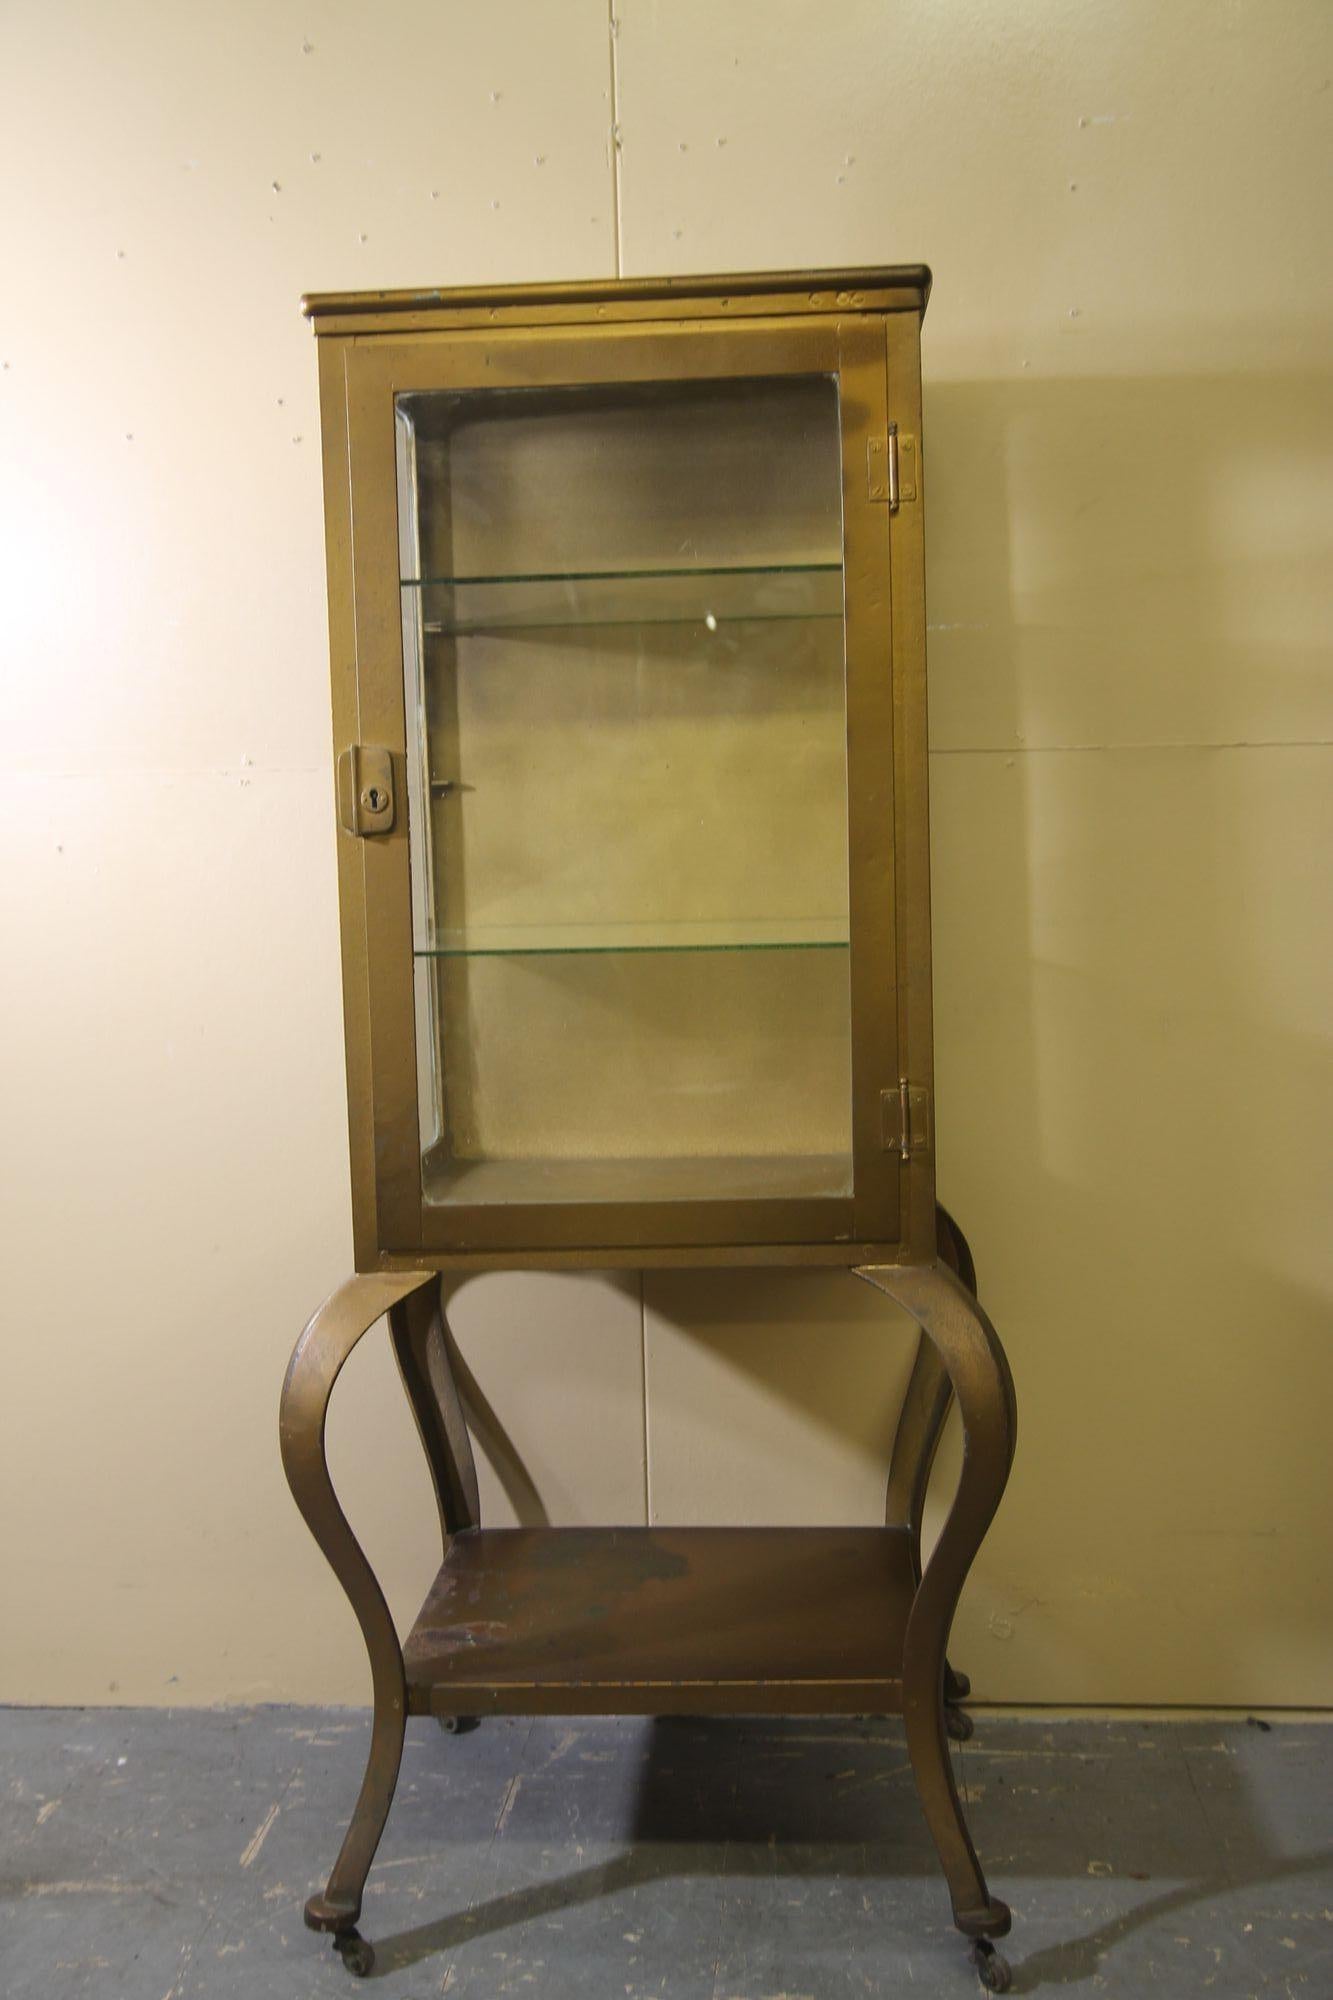 Pleased to offer this great vintage medical cabinet. This cabinet was painted gold many years ago and I think looks great with this finish. This cabinet has a glass door, glass side panels, 2 glass shelves and metal bottom shelf. Im sure you will